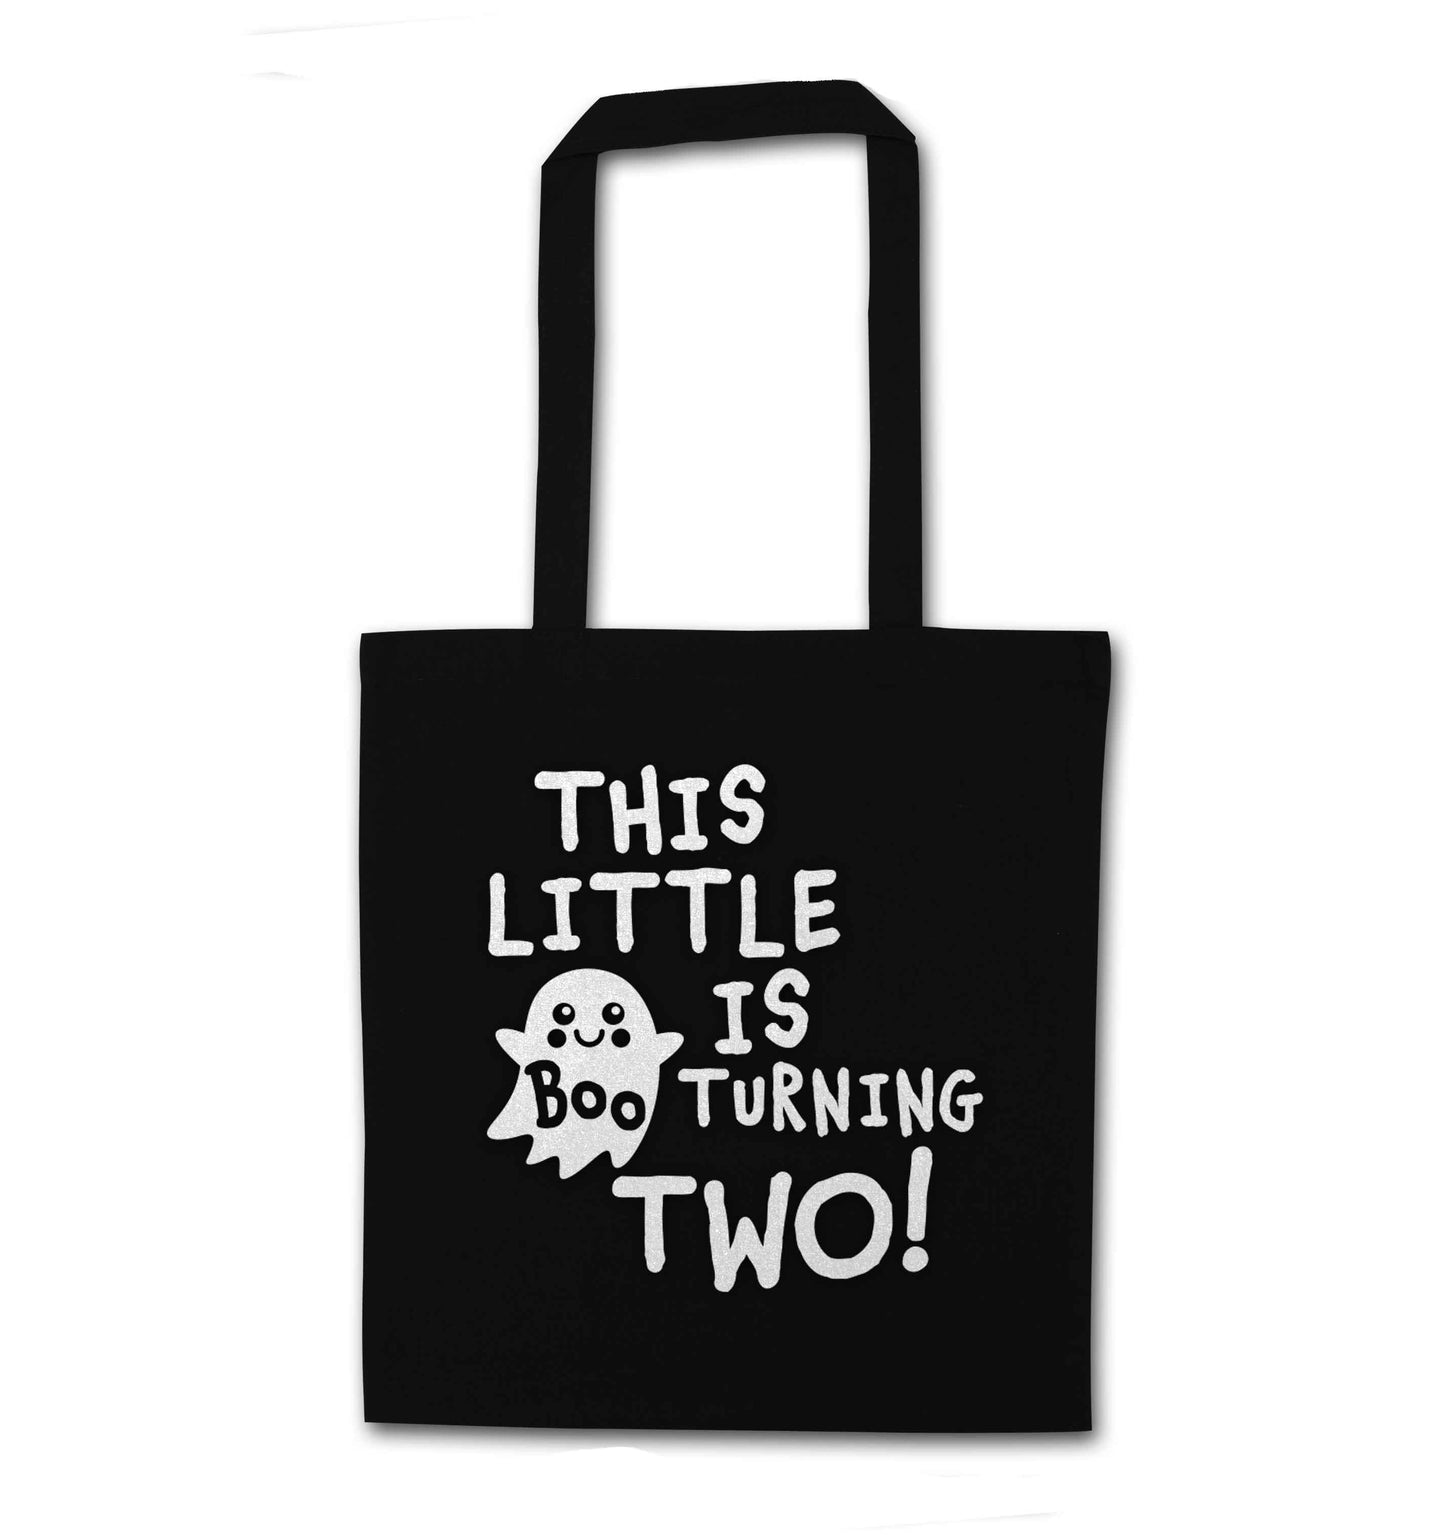 This little boo is turning two black tote bag